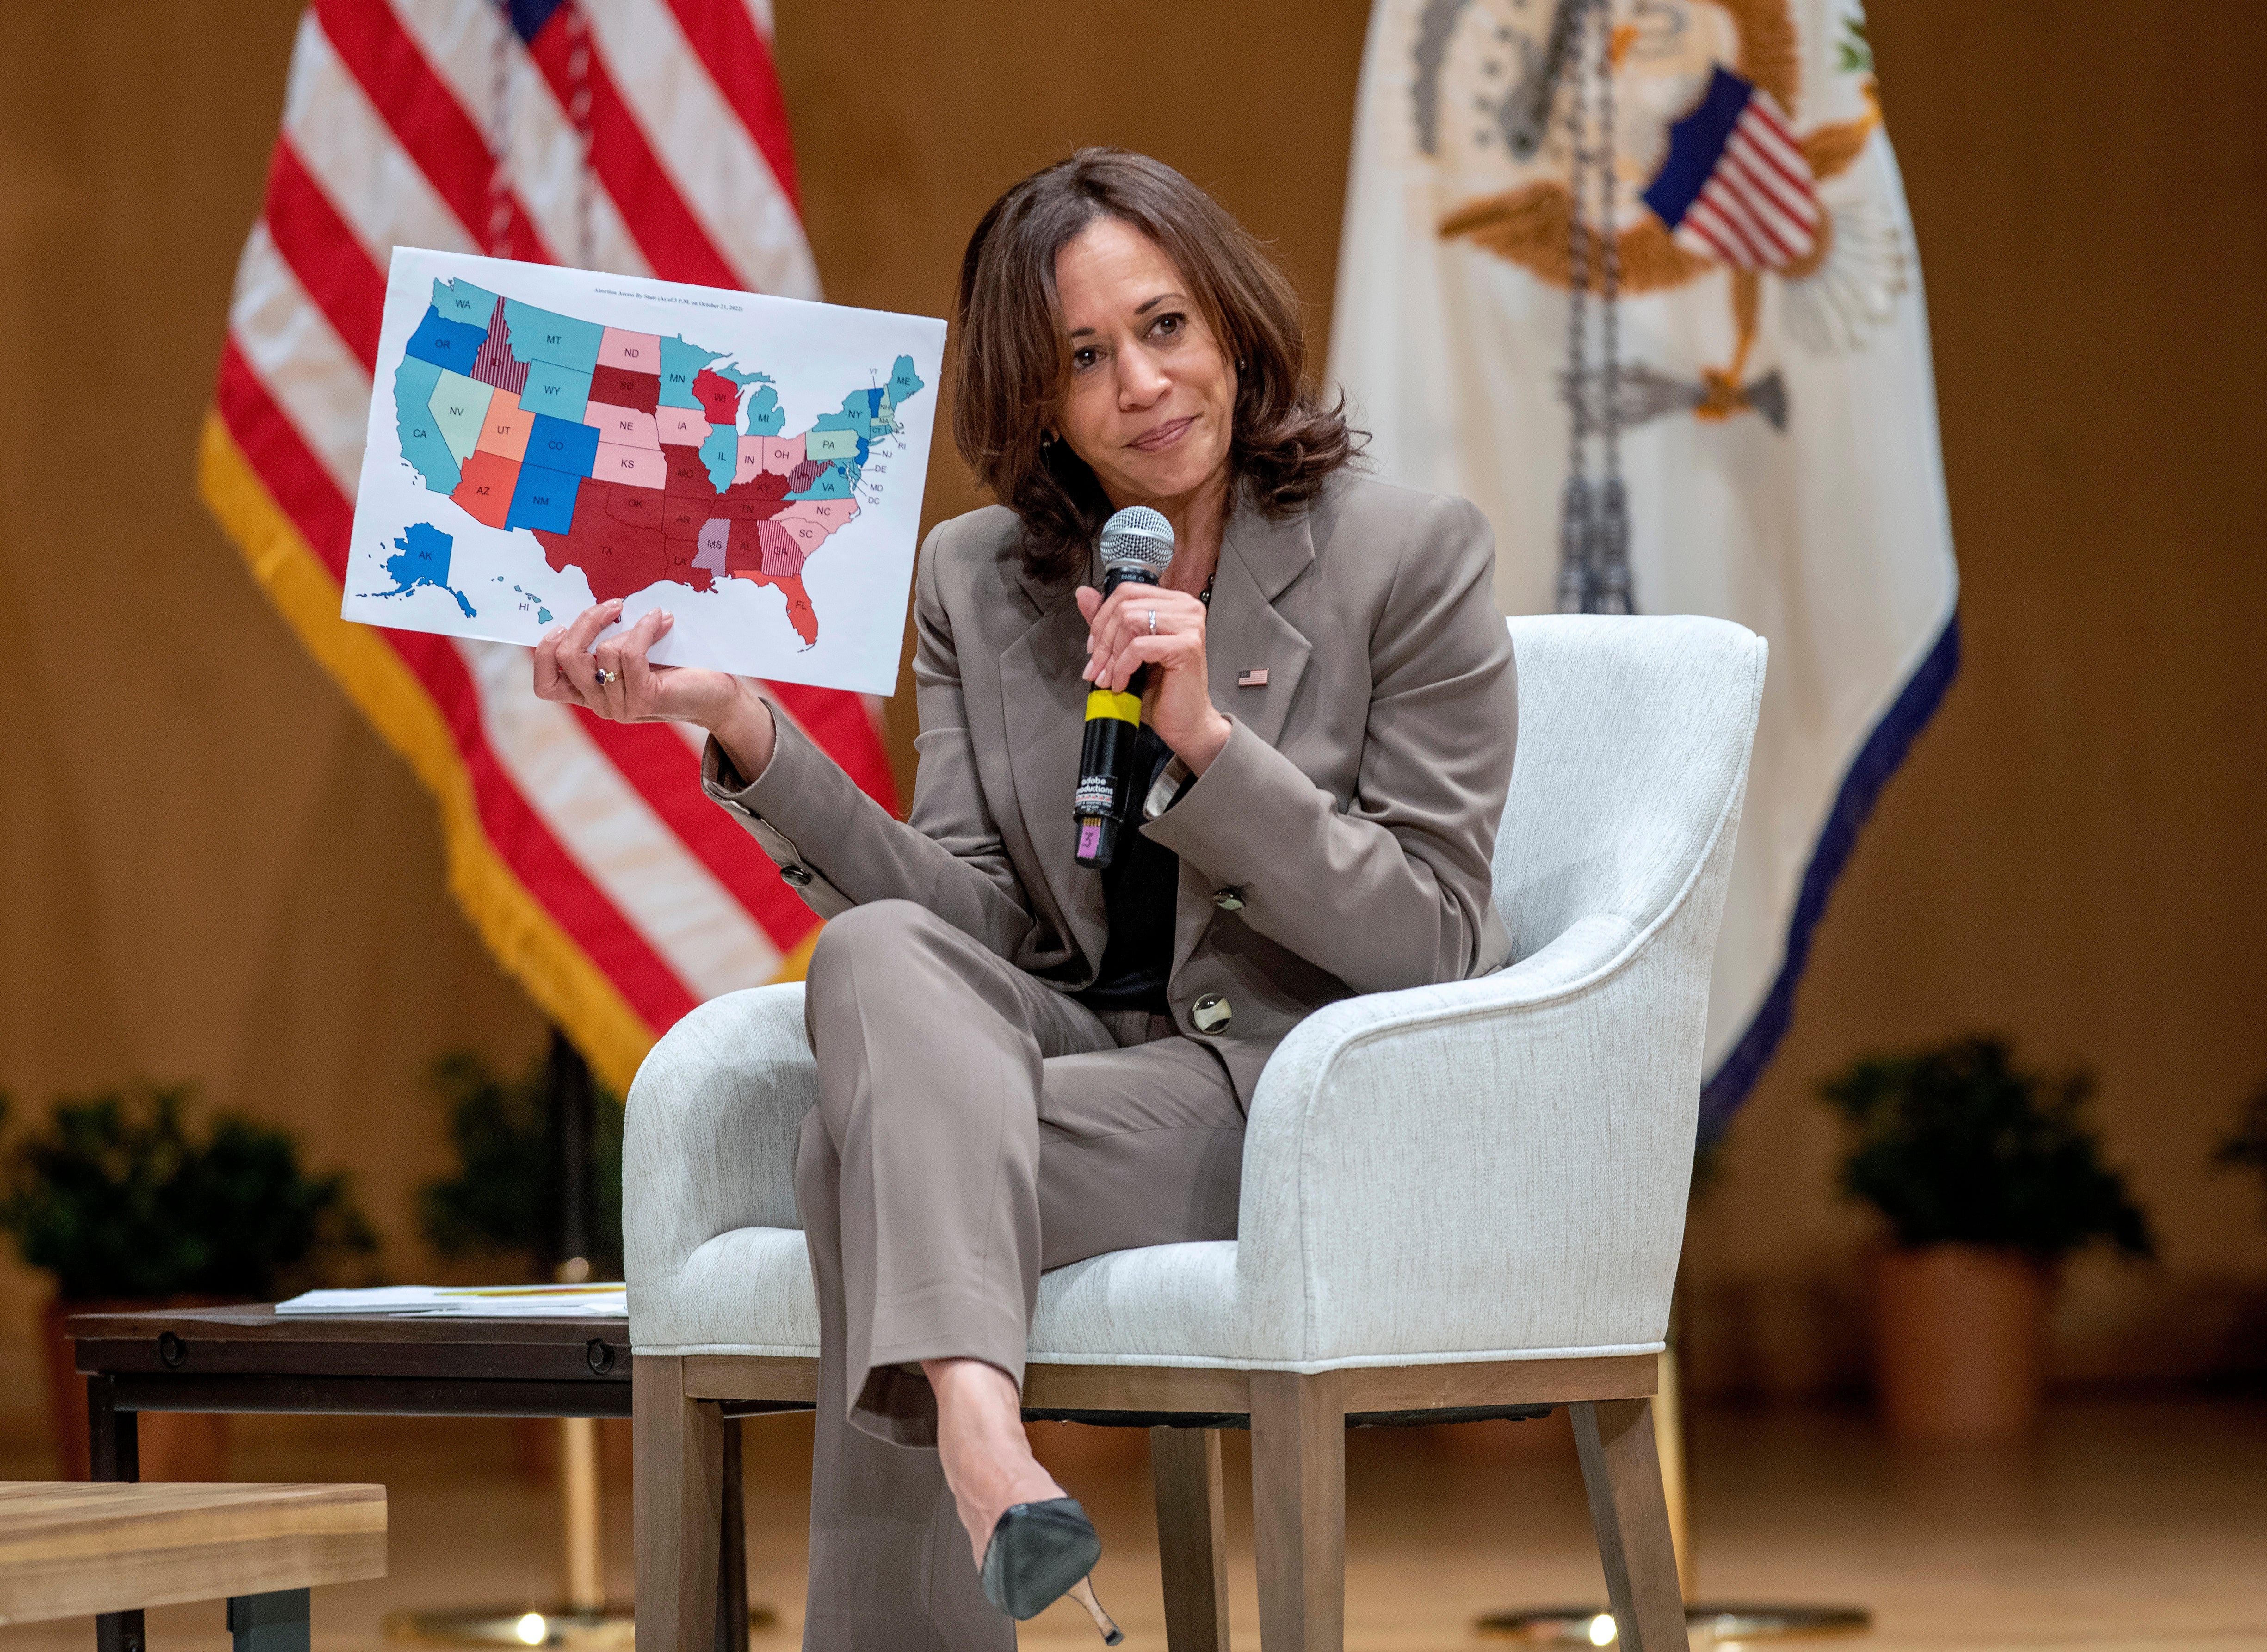 Vice President Kamala Harris uses a map to talk about states where abortion rights are protected